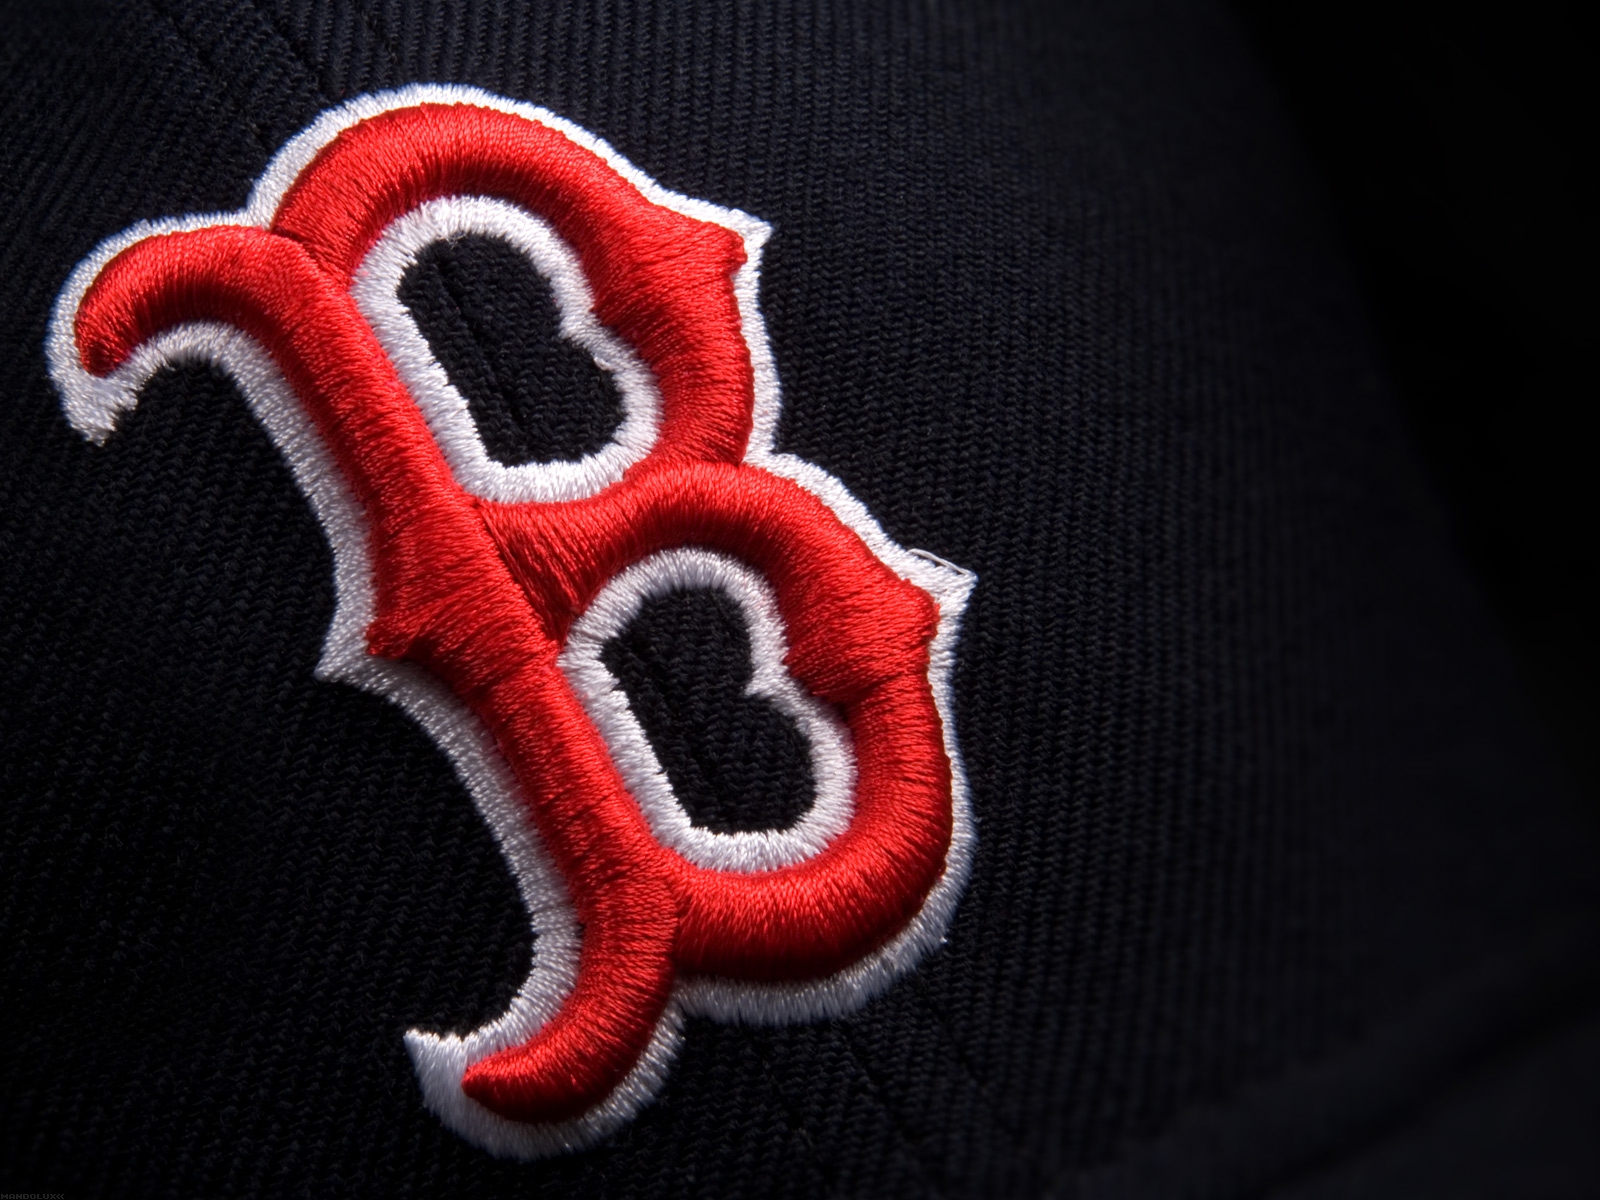 Boston Red Sox Wallpaper Background